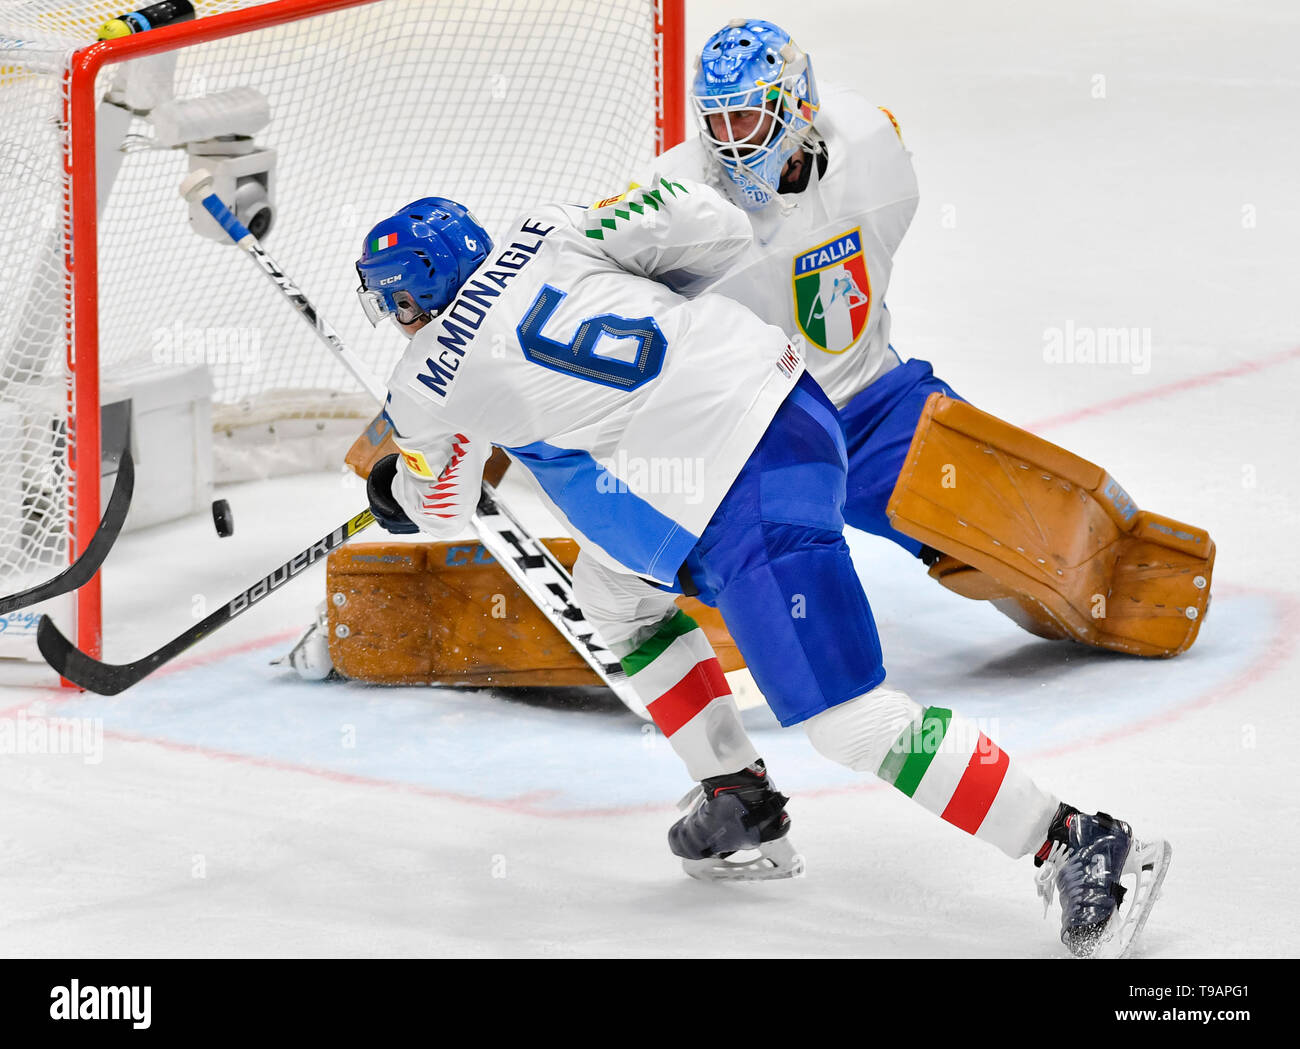 Bratislava, Slovakia. 17th May, 2019. Goalie of Italy MARCO DE FILIPPO ROIA receives goal during the Ice Hockey World Championships group B match between Czech Republic and Italy in Bratislava, Slovakia, May 17, 2019. At left is SEAN MCMONAGLE of Italy. Credit: Vit Simanek/CTK Photo/Alamy Live News Stock Photo